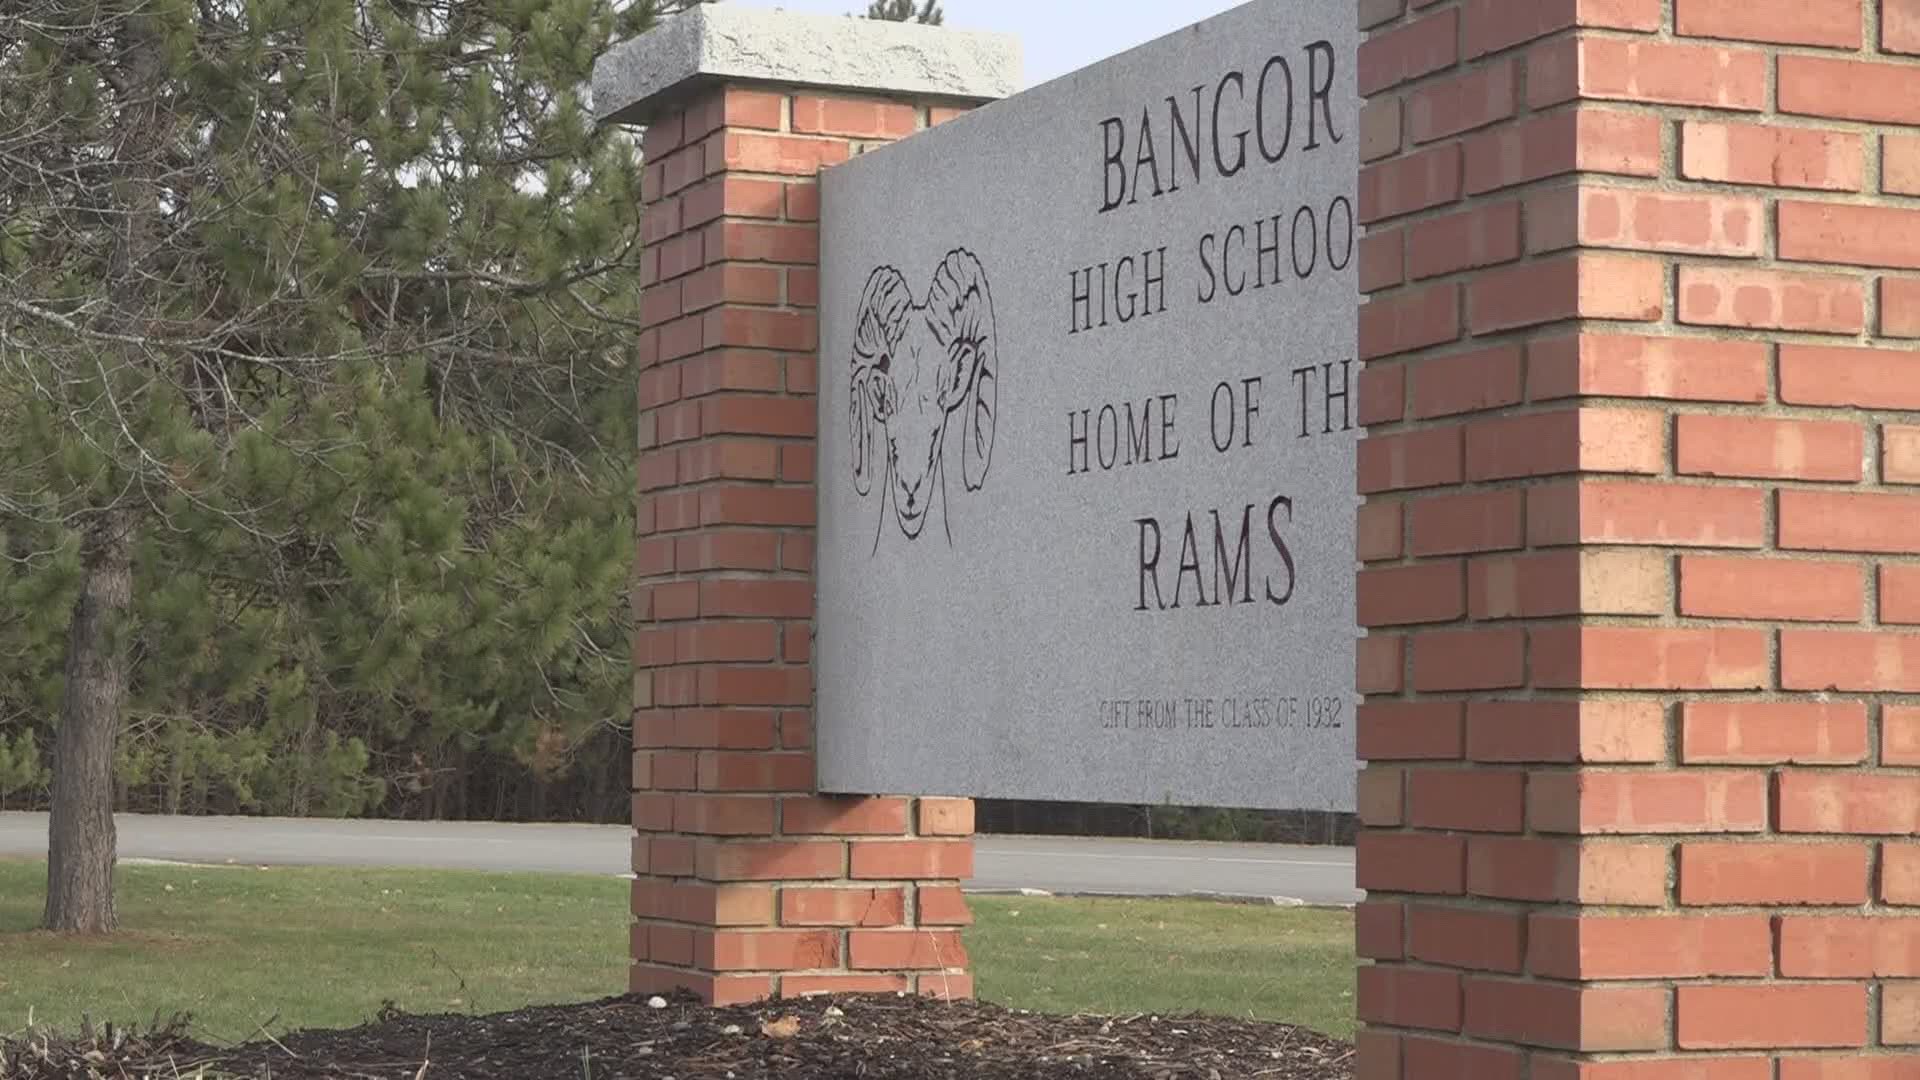 Several Bangor schools have begun reporting positive COVID-19 cases among faculty and students.